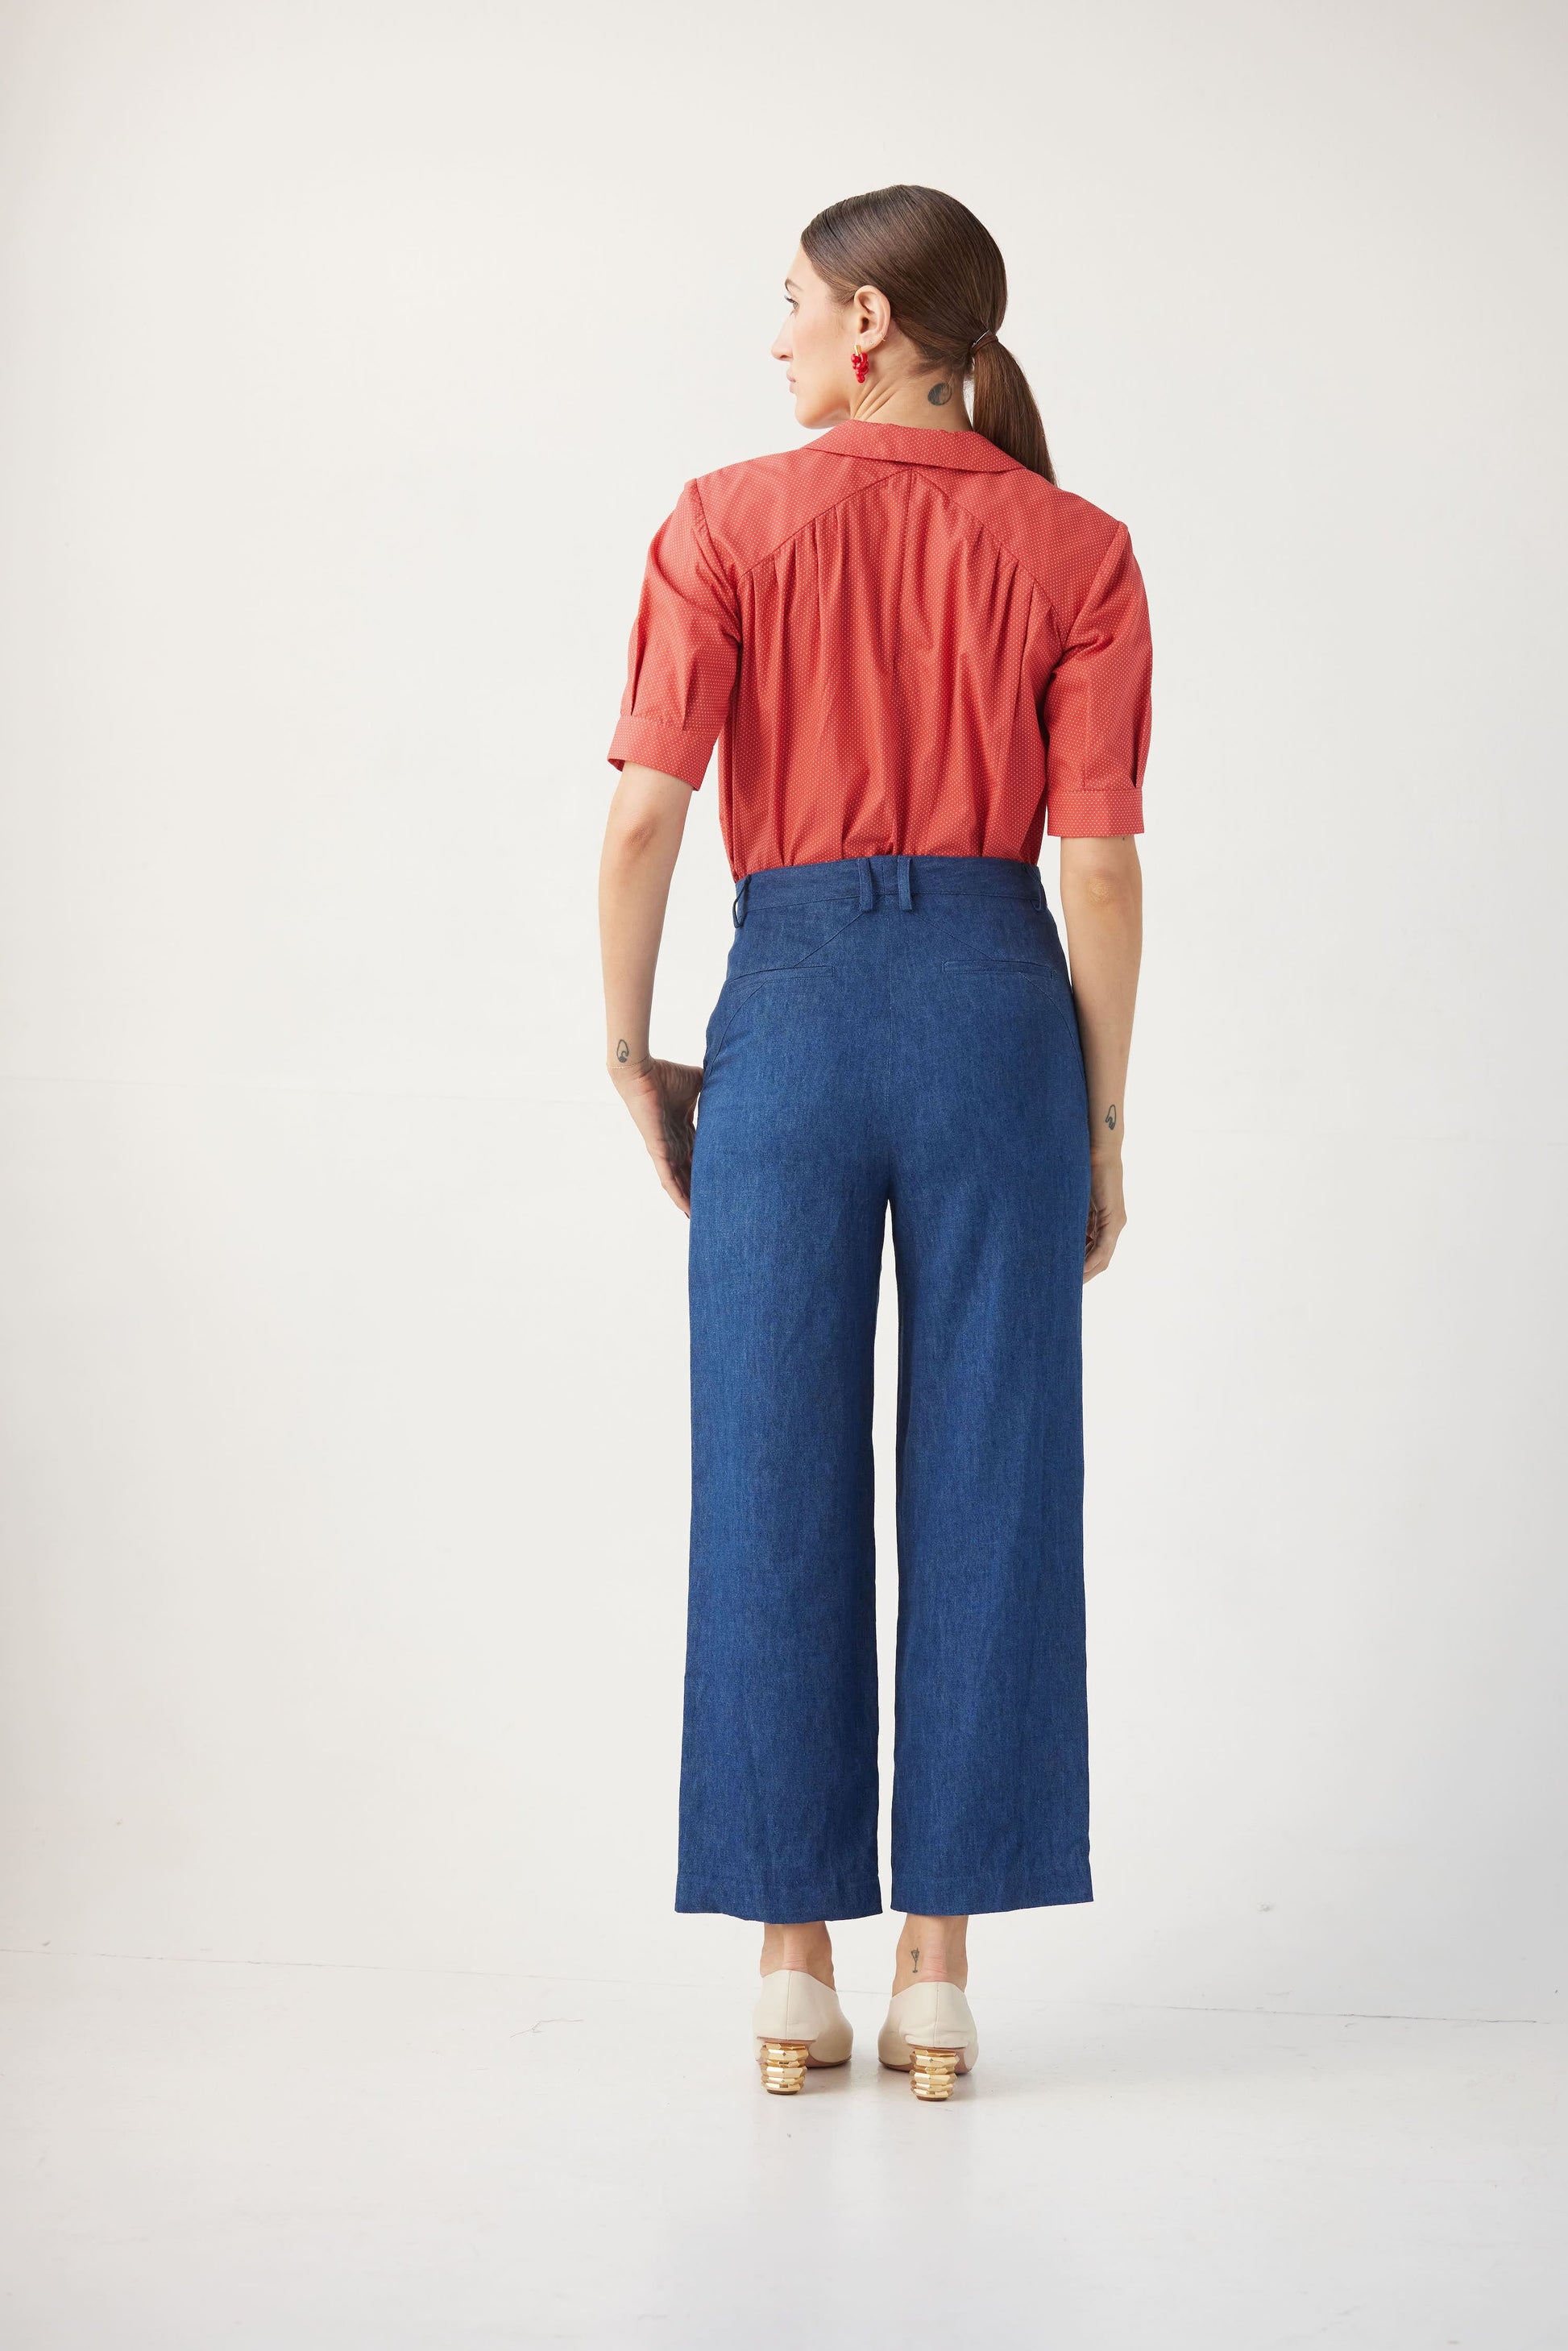 Piper Pant in Soft Denim Pants CHRISTINE ALCALAY   